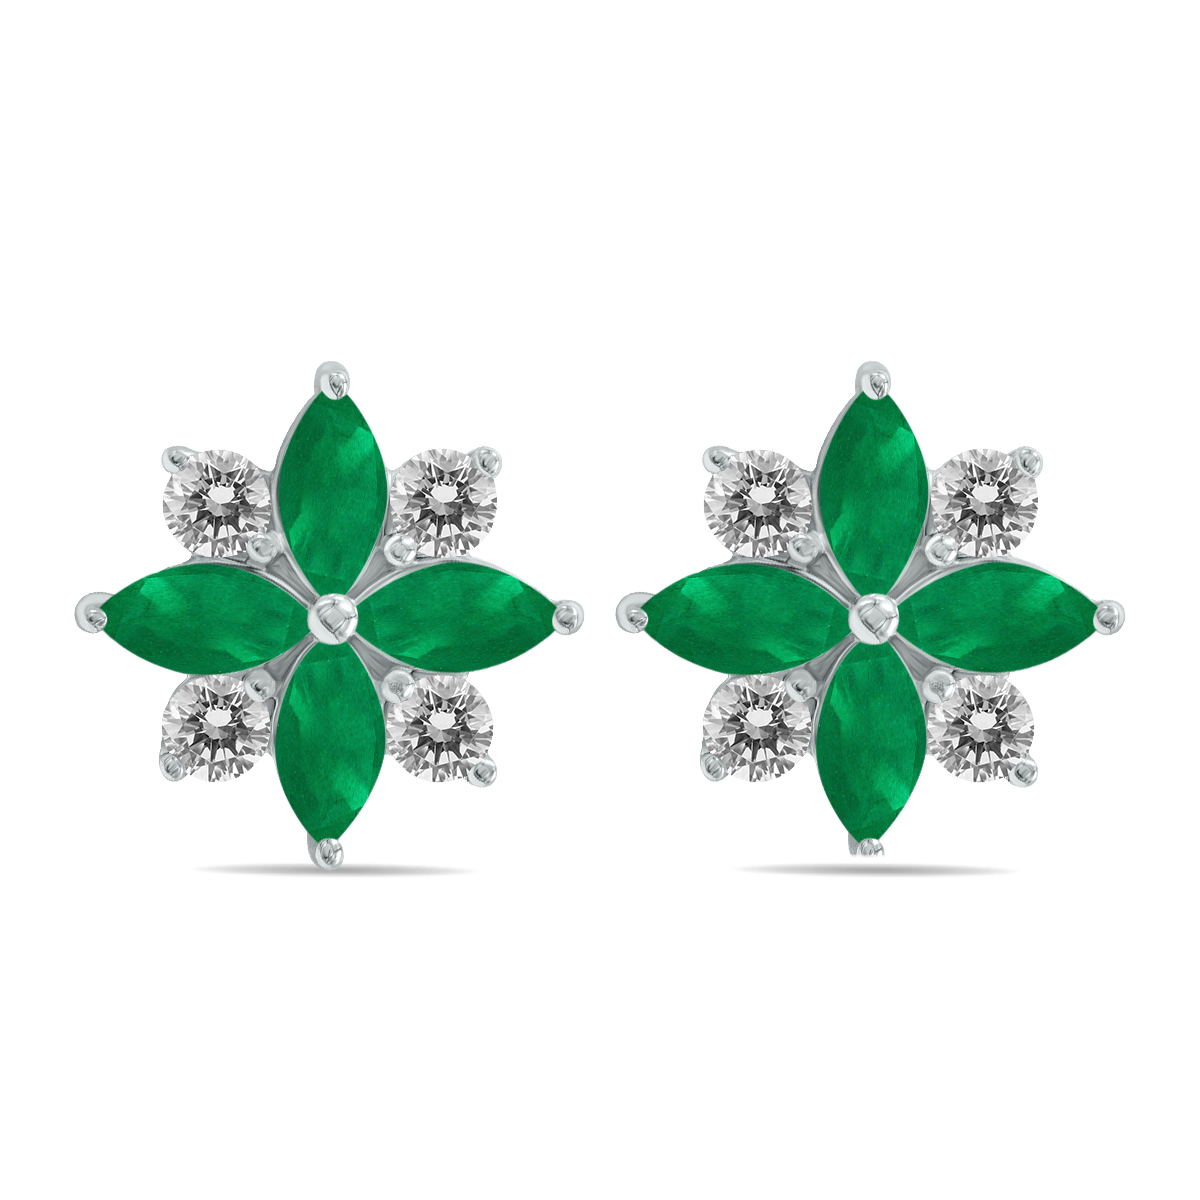 Image of 1 Carat TW Emerald and Diamond Flower Earrings in 10K White Gold